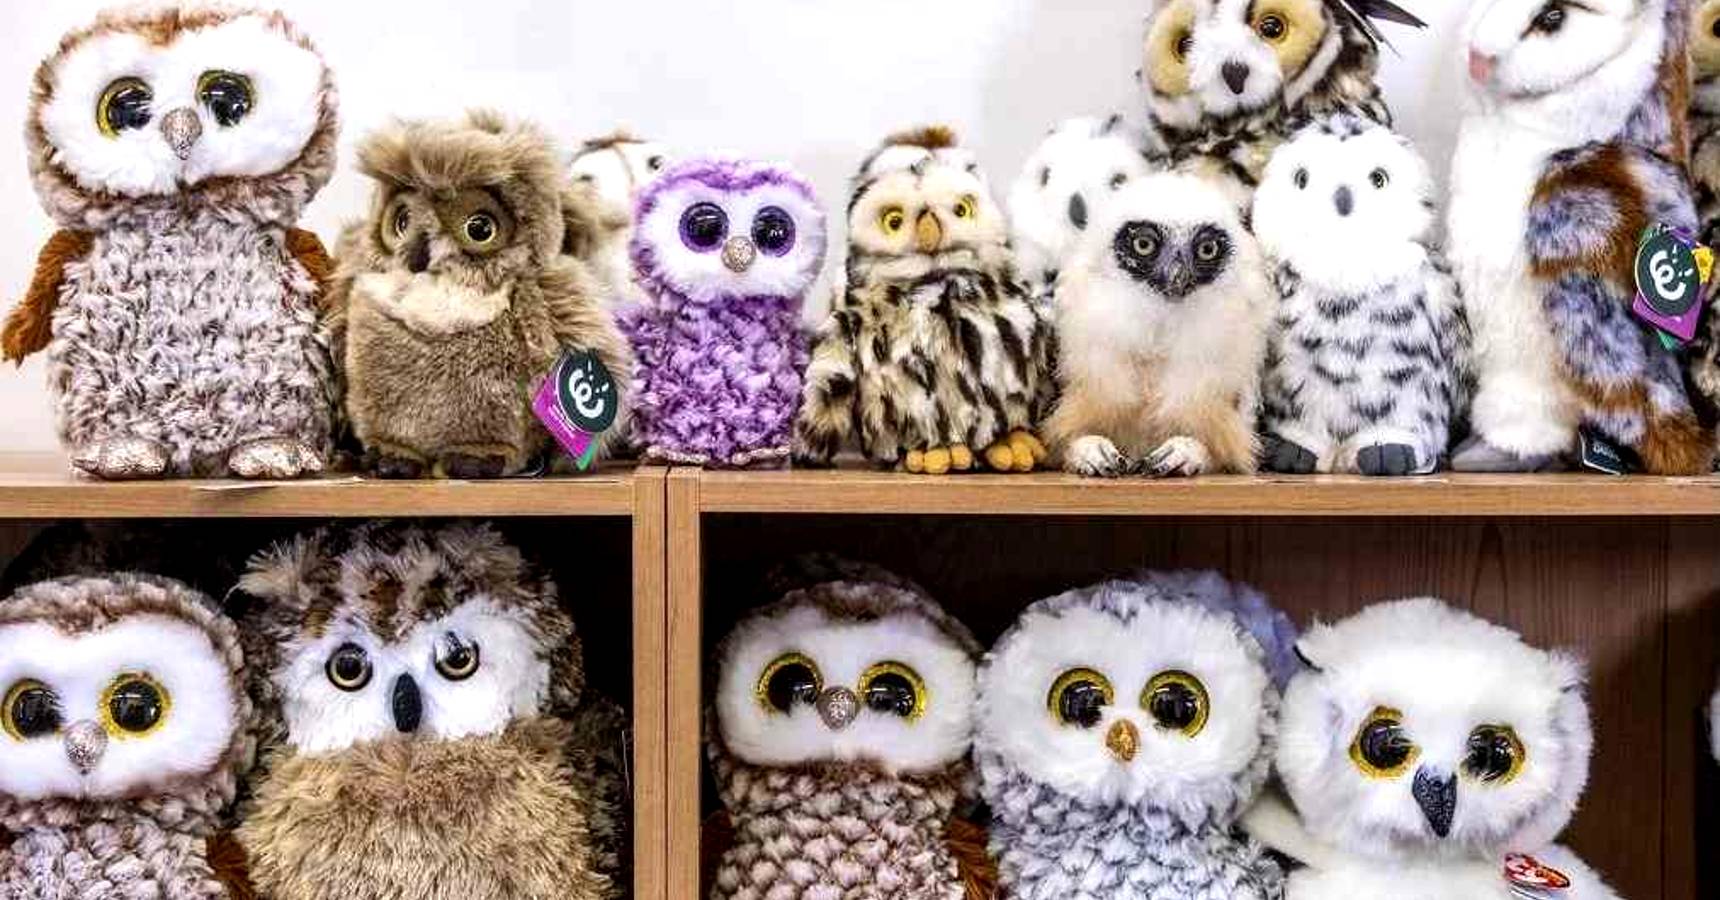 Optical illusion can you spot the real owl within 8 seconds